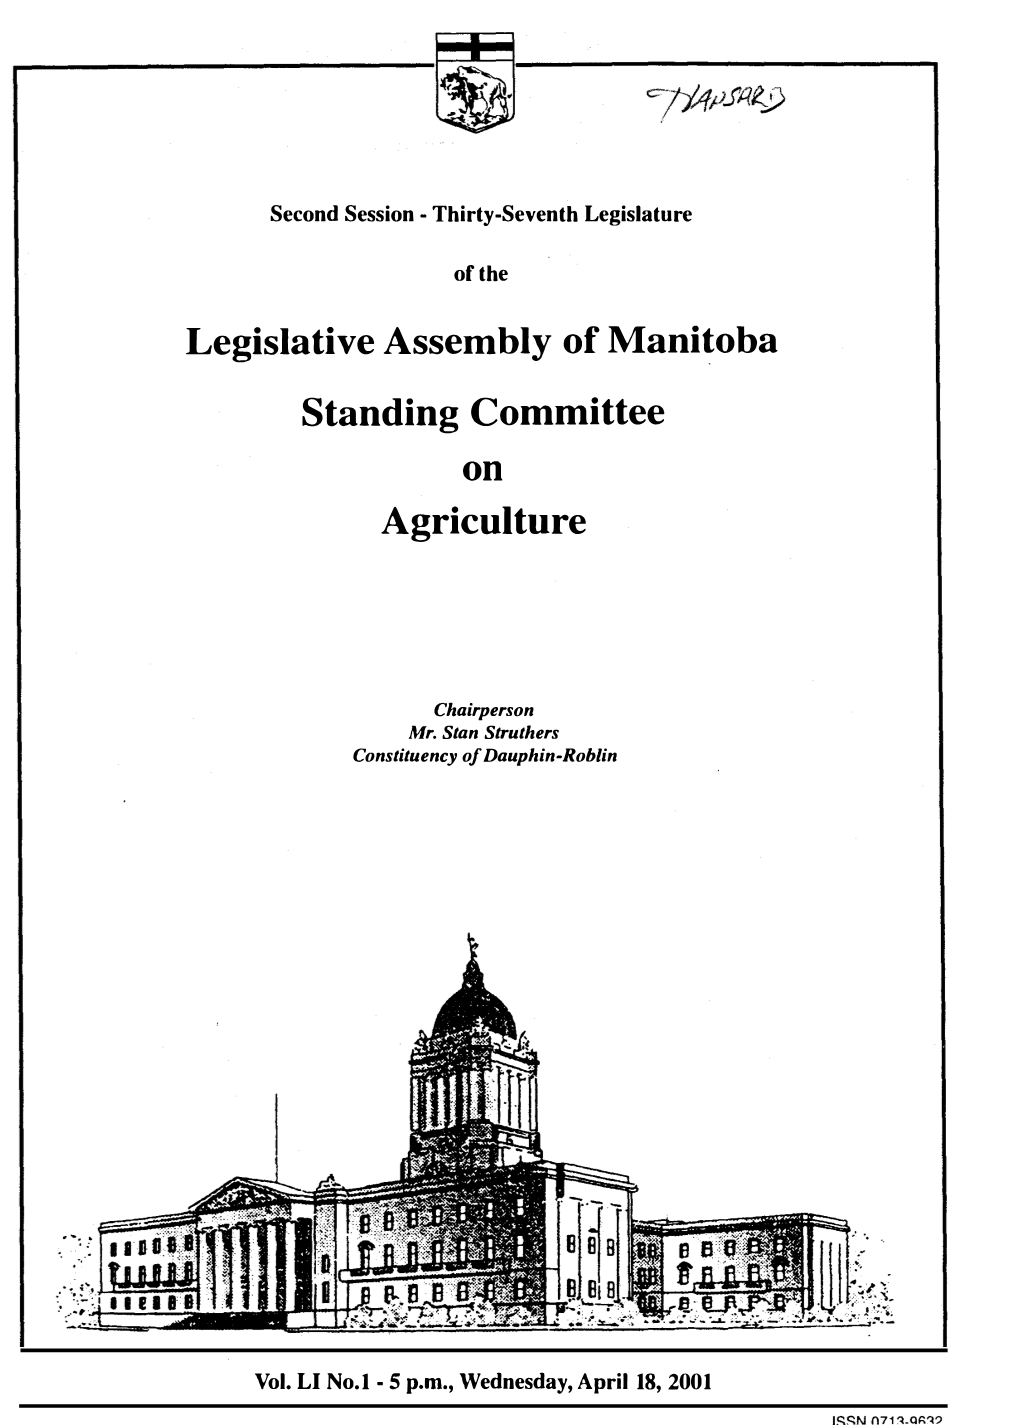 Legislative Assembly of Manitoba Standing Committee on Agriculture